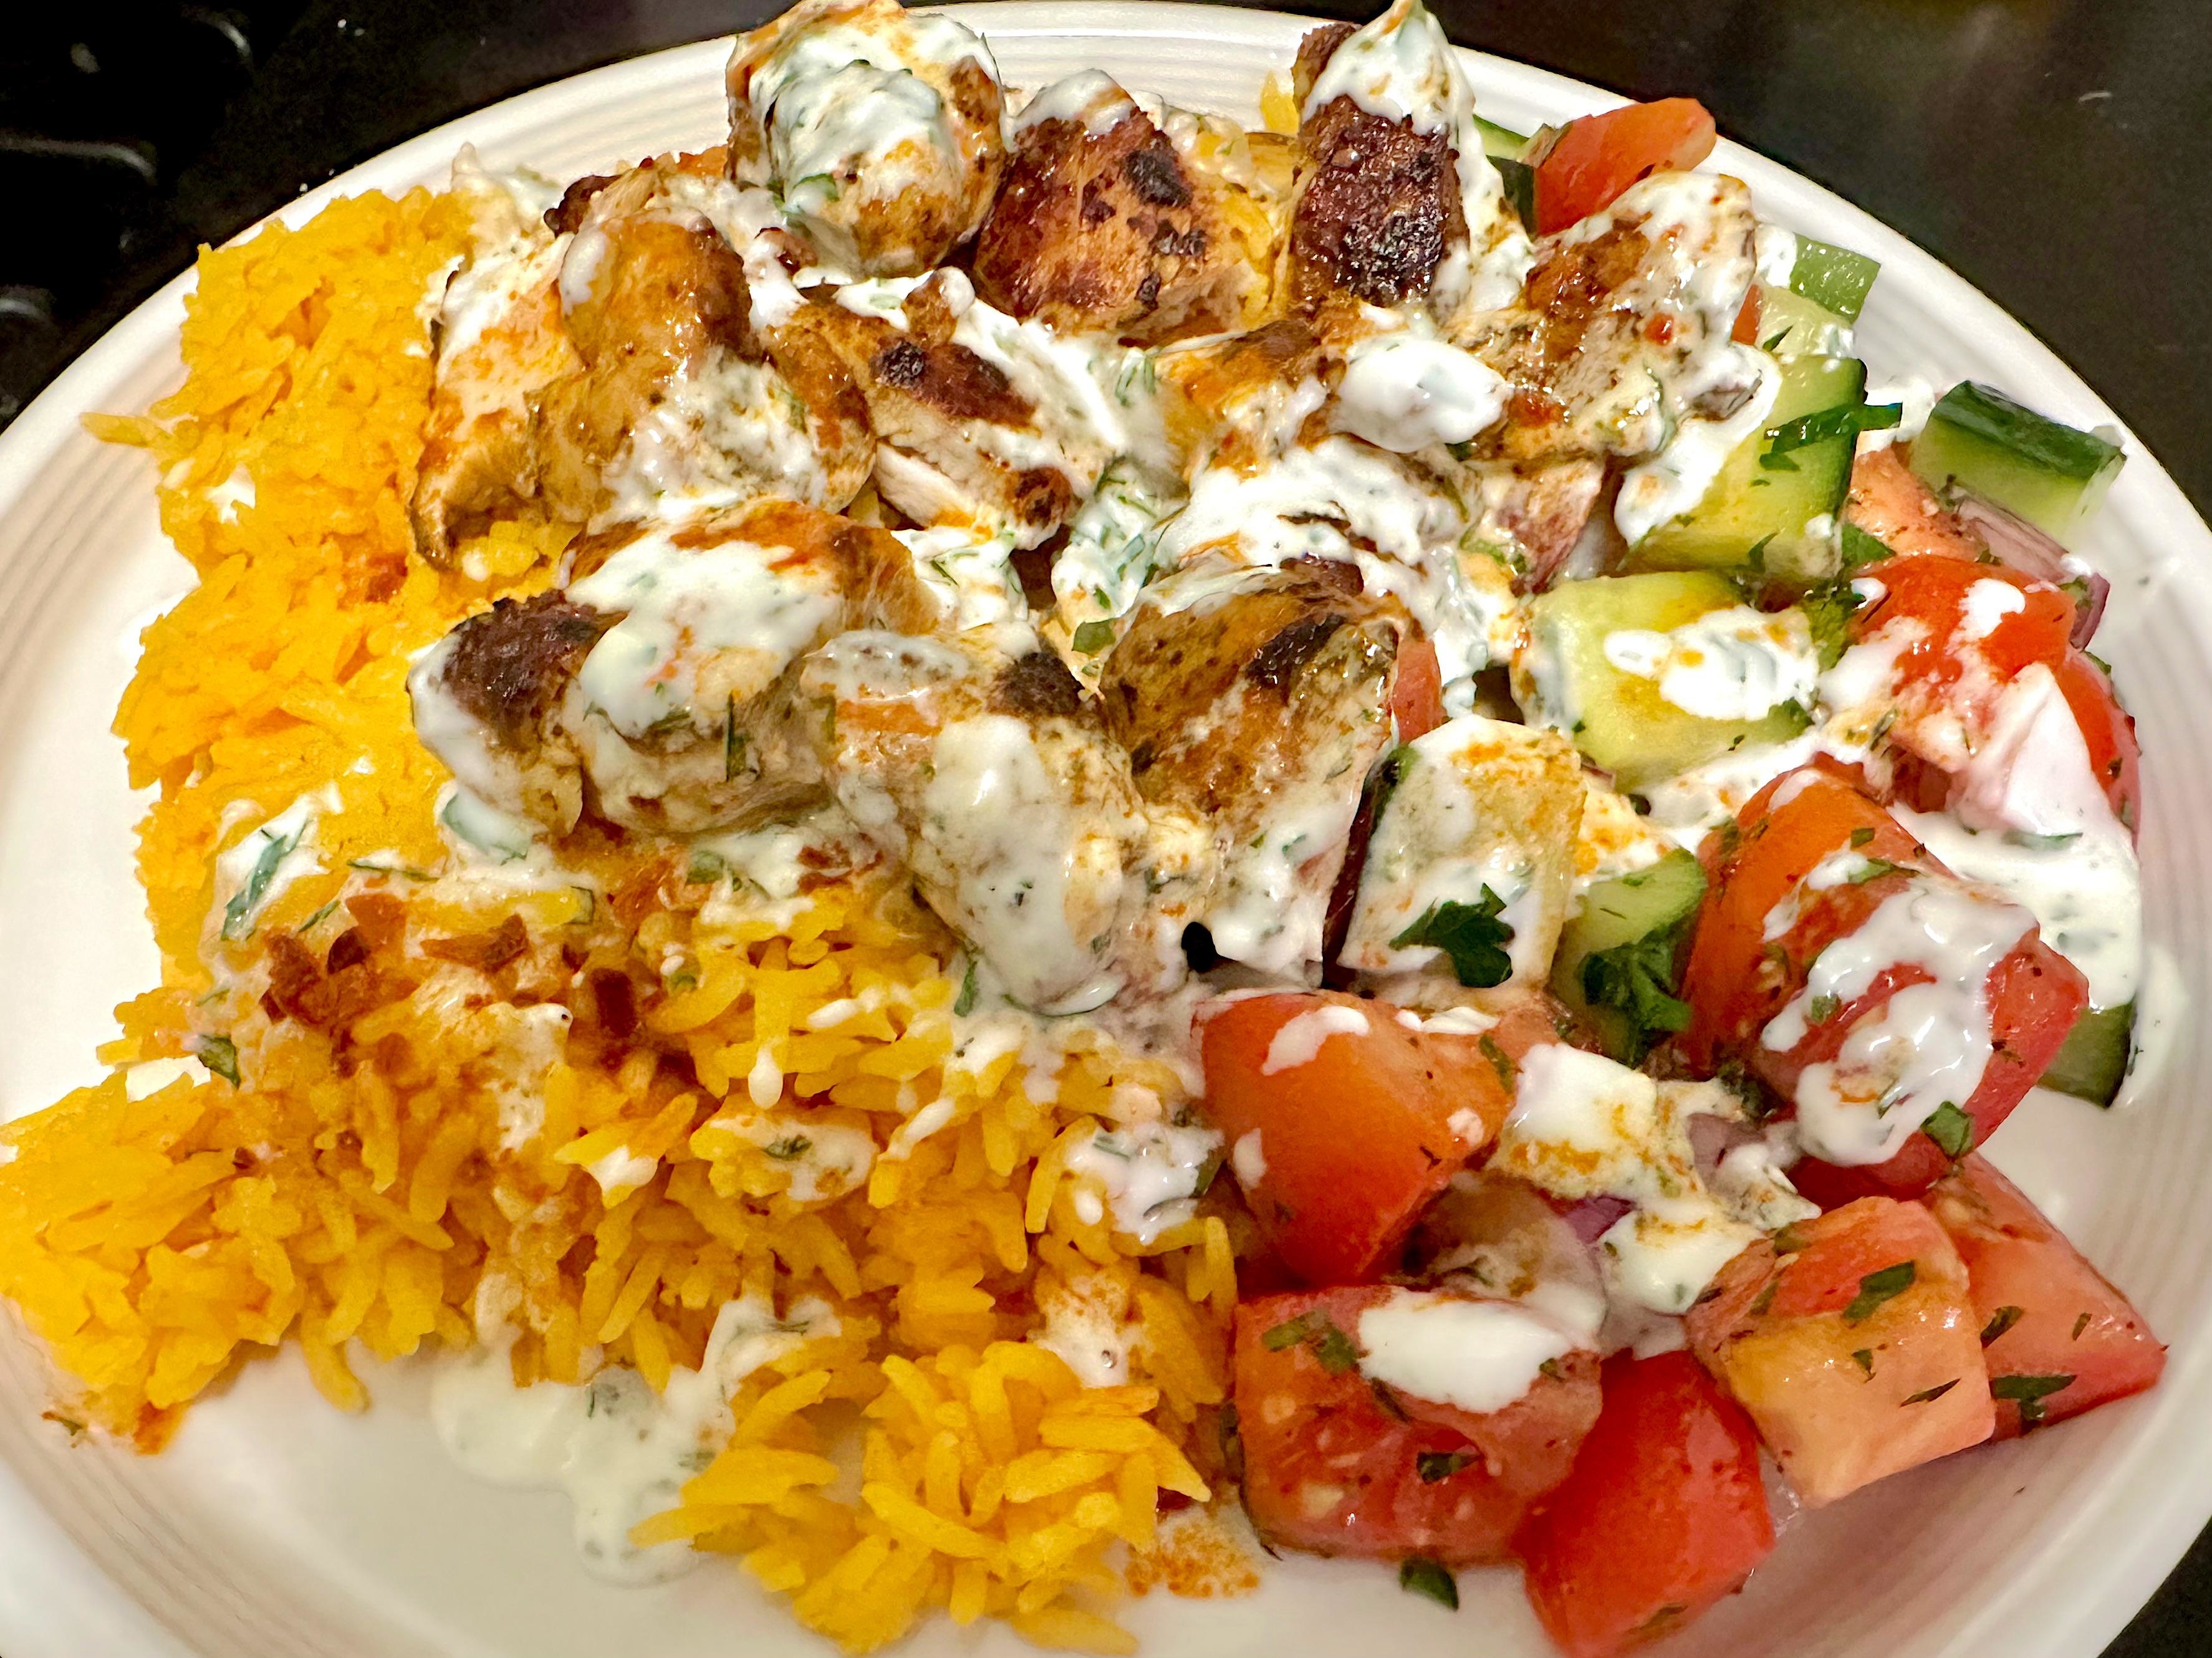 A plate of chicken kabobs with rice, chopped vegetables, and a creamy sauce